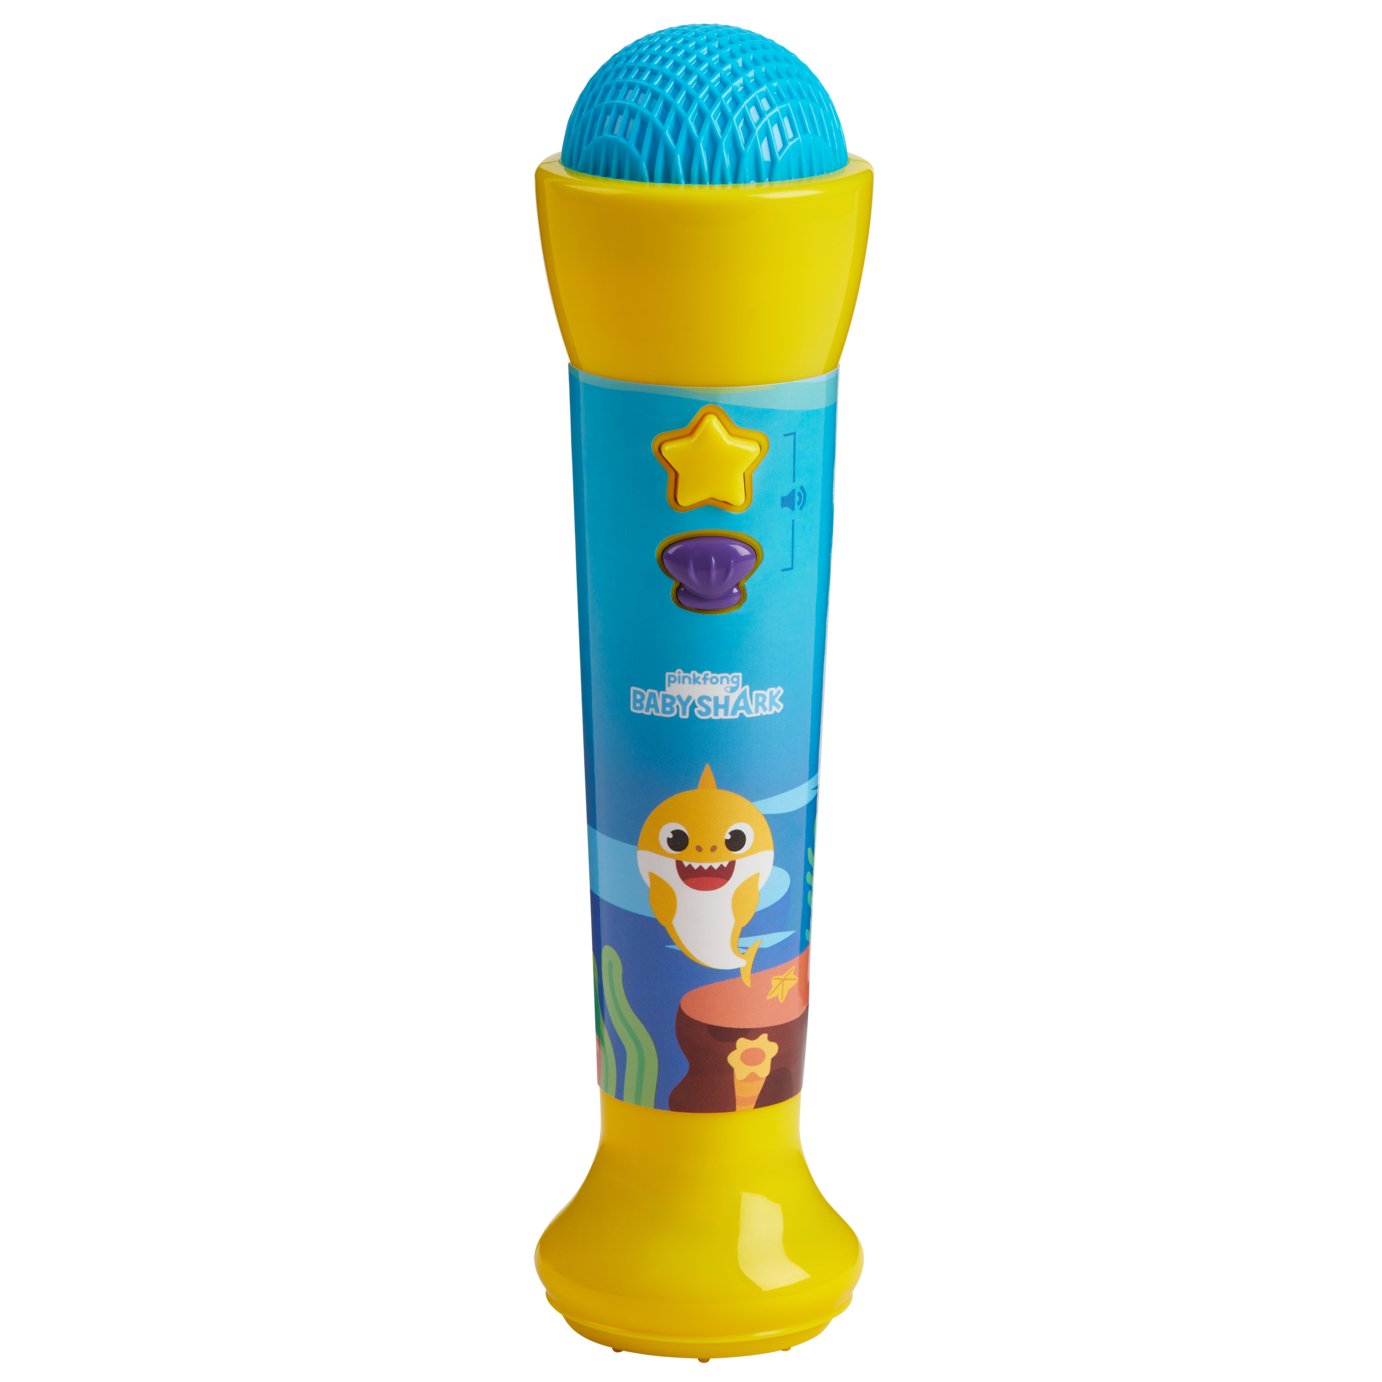 Baby Shark Official Silly Sing-Along Microphone Review